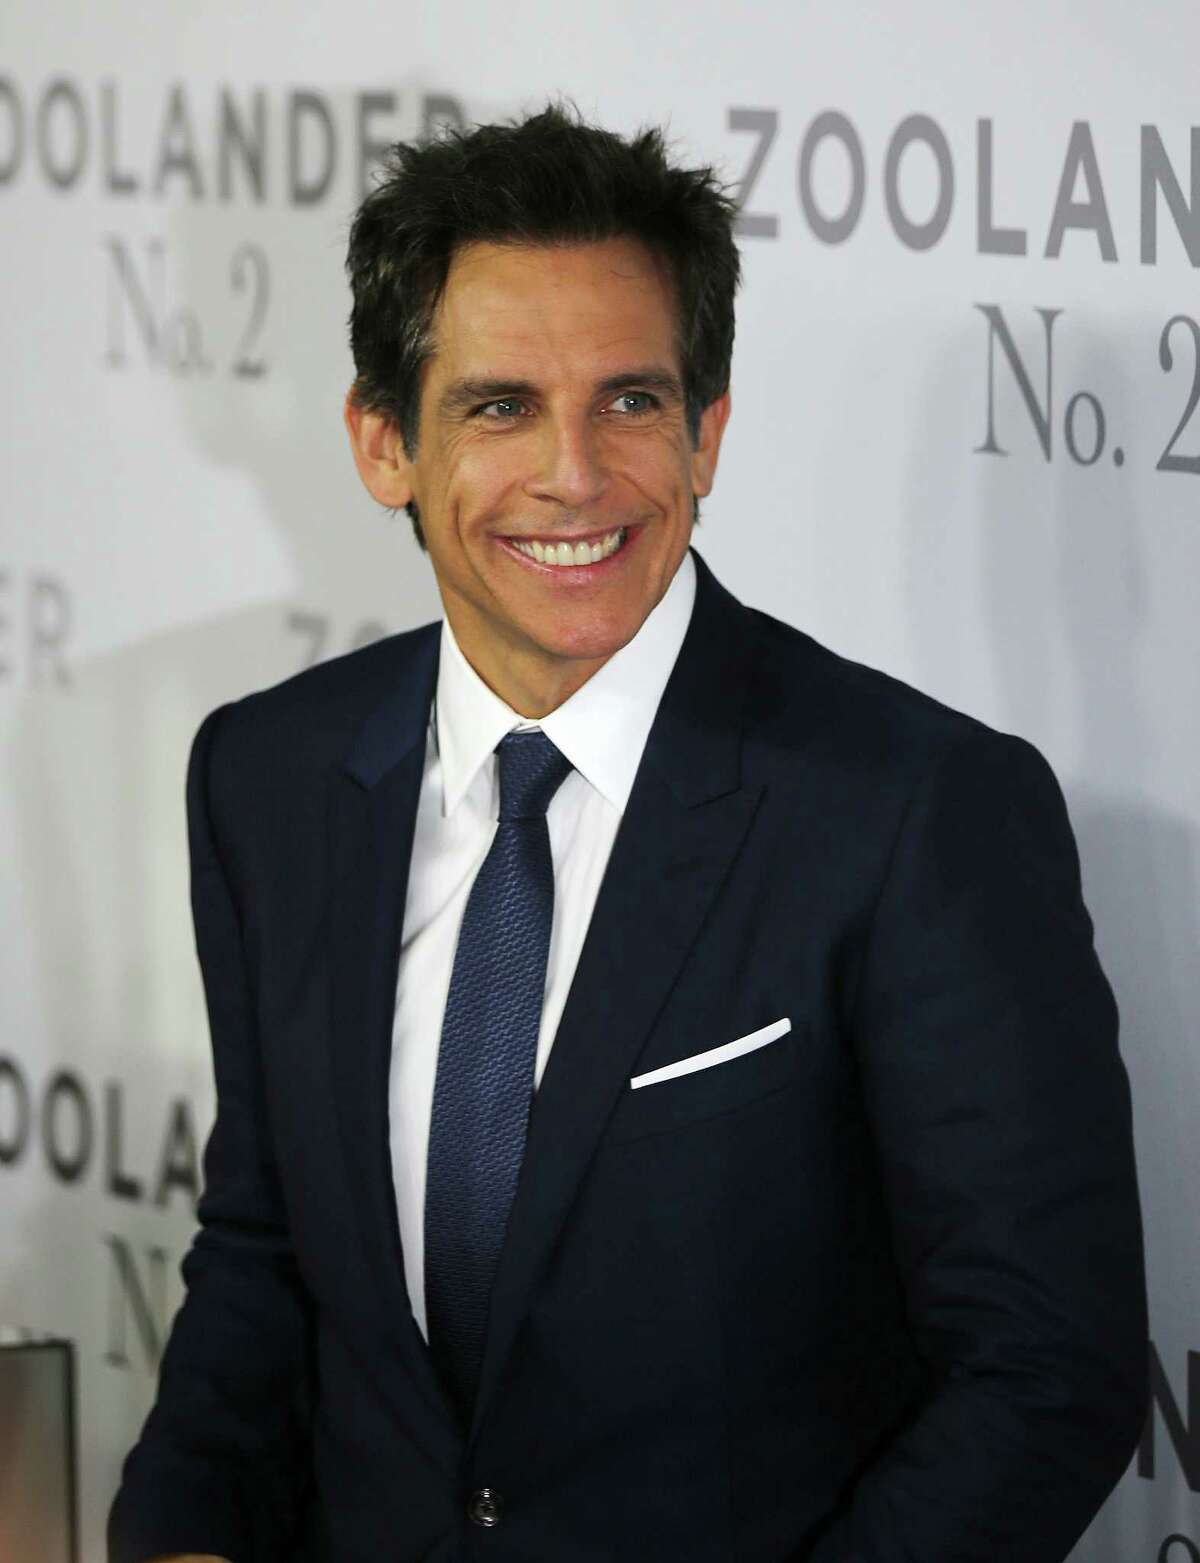 File- This jan. 26, 2016, file photo shows Actor Ben Stiller arriving at the premier of "Zoolander No2" in Sydney, Australia. Stiller and supermodel Alek Wek are standing with refugees. Stiller and Wek visited the U.N. General Assembly on Friday, Sept. 16, 2016, to present Secretary-General Ban Ki-moon with a petition bearing over 1.3 million signatures, calling on governments to act with solidarity and shared responsibility for the world's 21.3 million refugees. (AP Photo/Rob Griffith, File) ORG XMIT: NY123